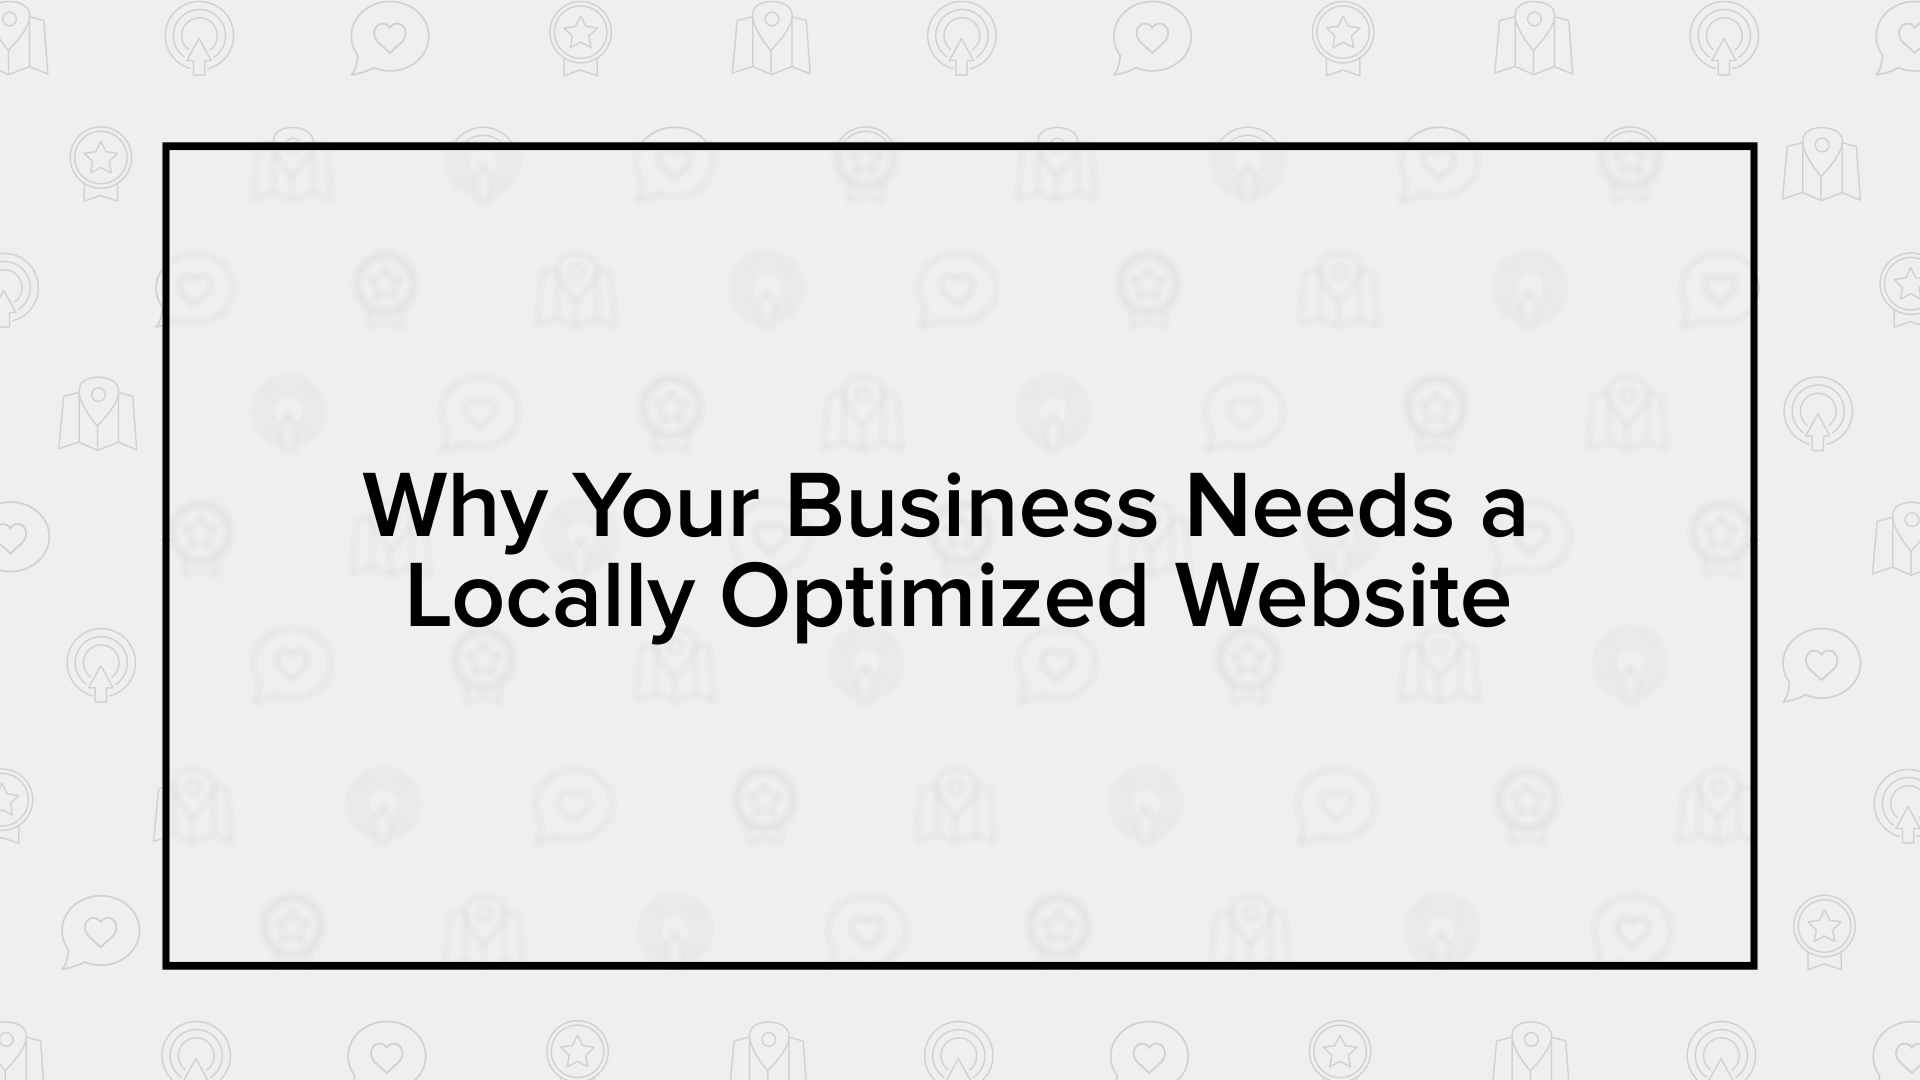 Why Do You Need a Locally Optimized Website?